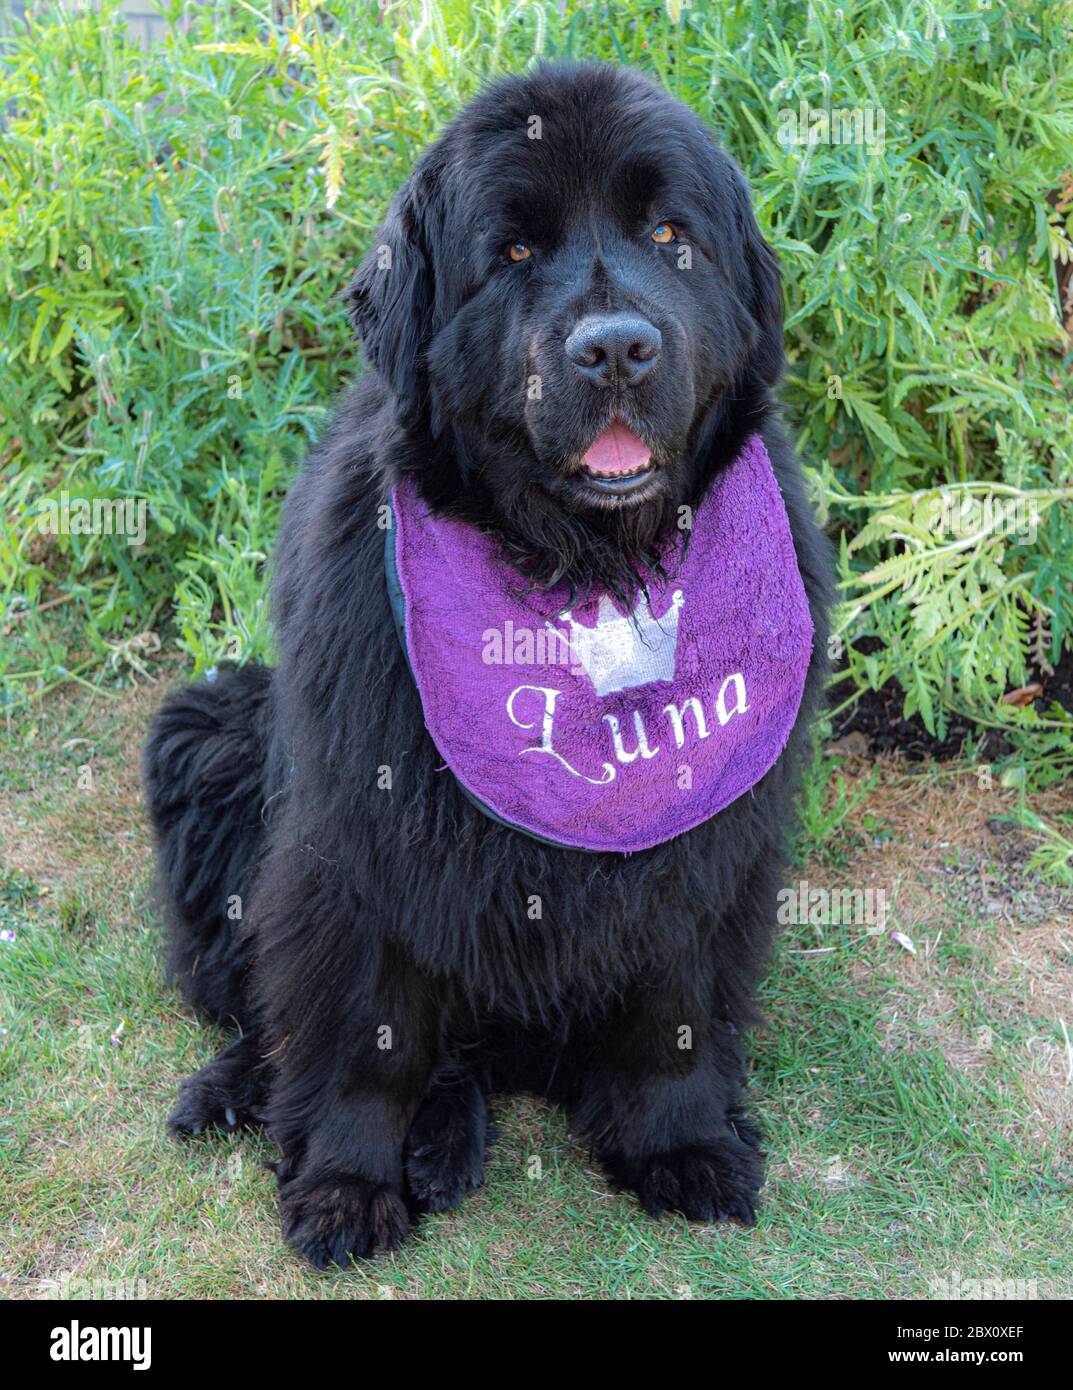 A beautiful adult pet Newfoundland dog (bitch), sitting in her garden, wearing a bib with her name Luna on it, looking into the camera. Stock Photo